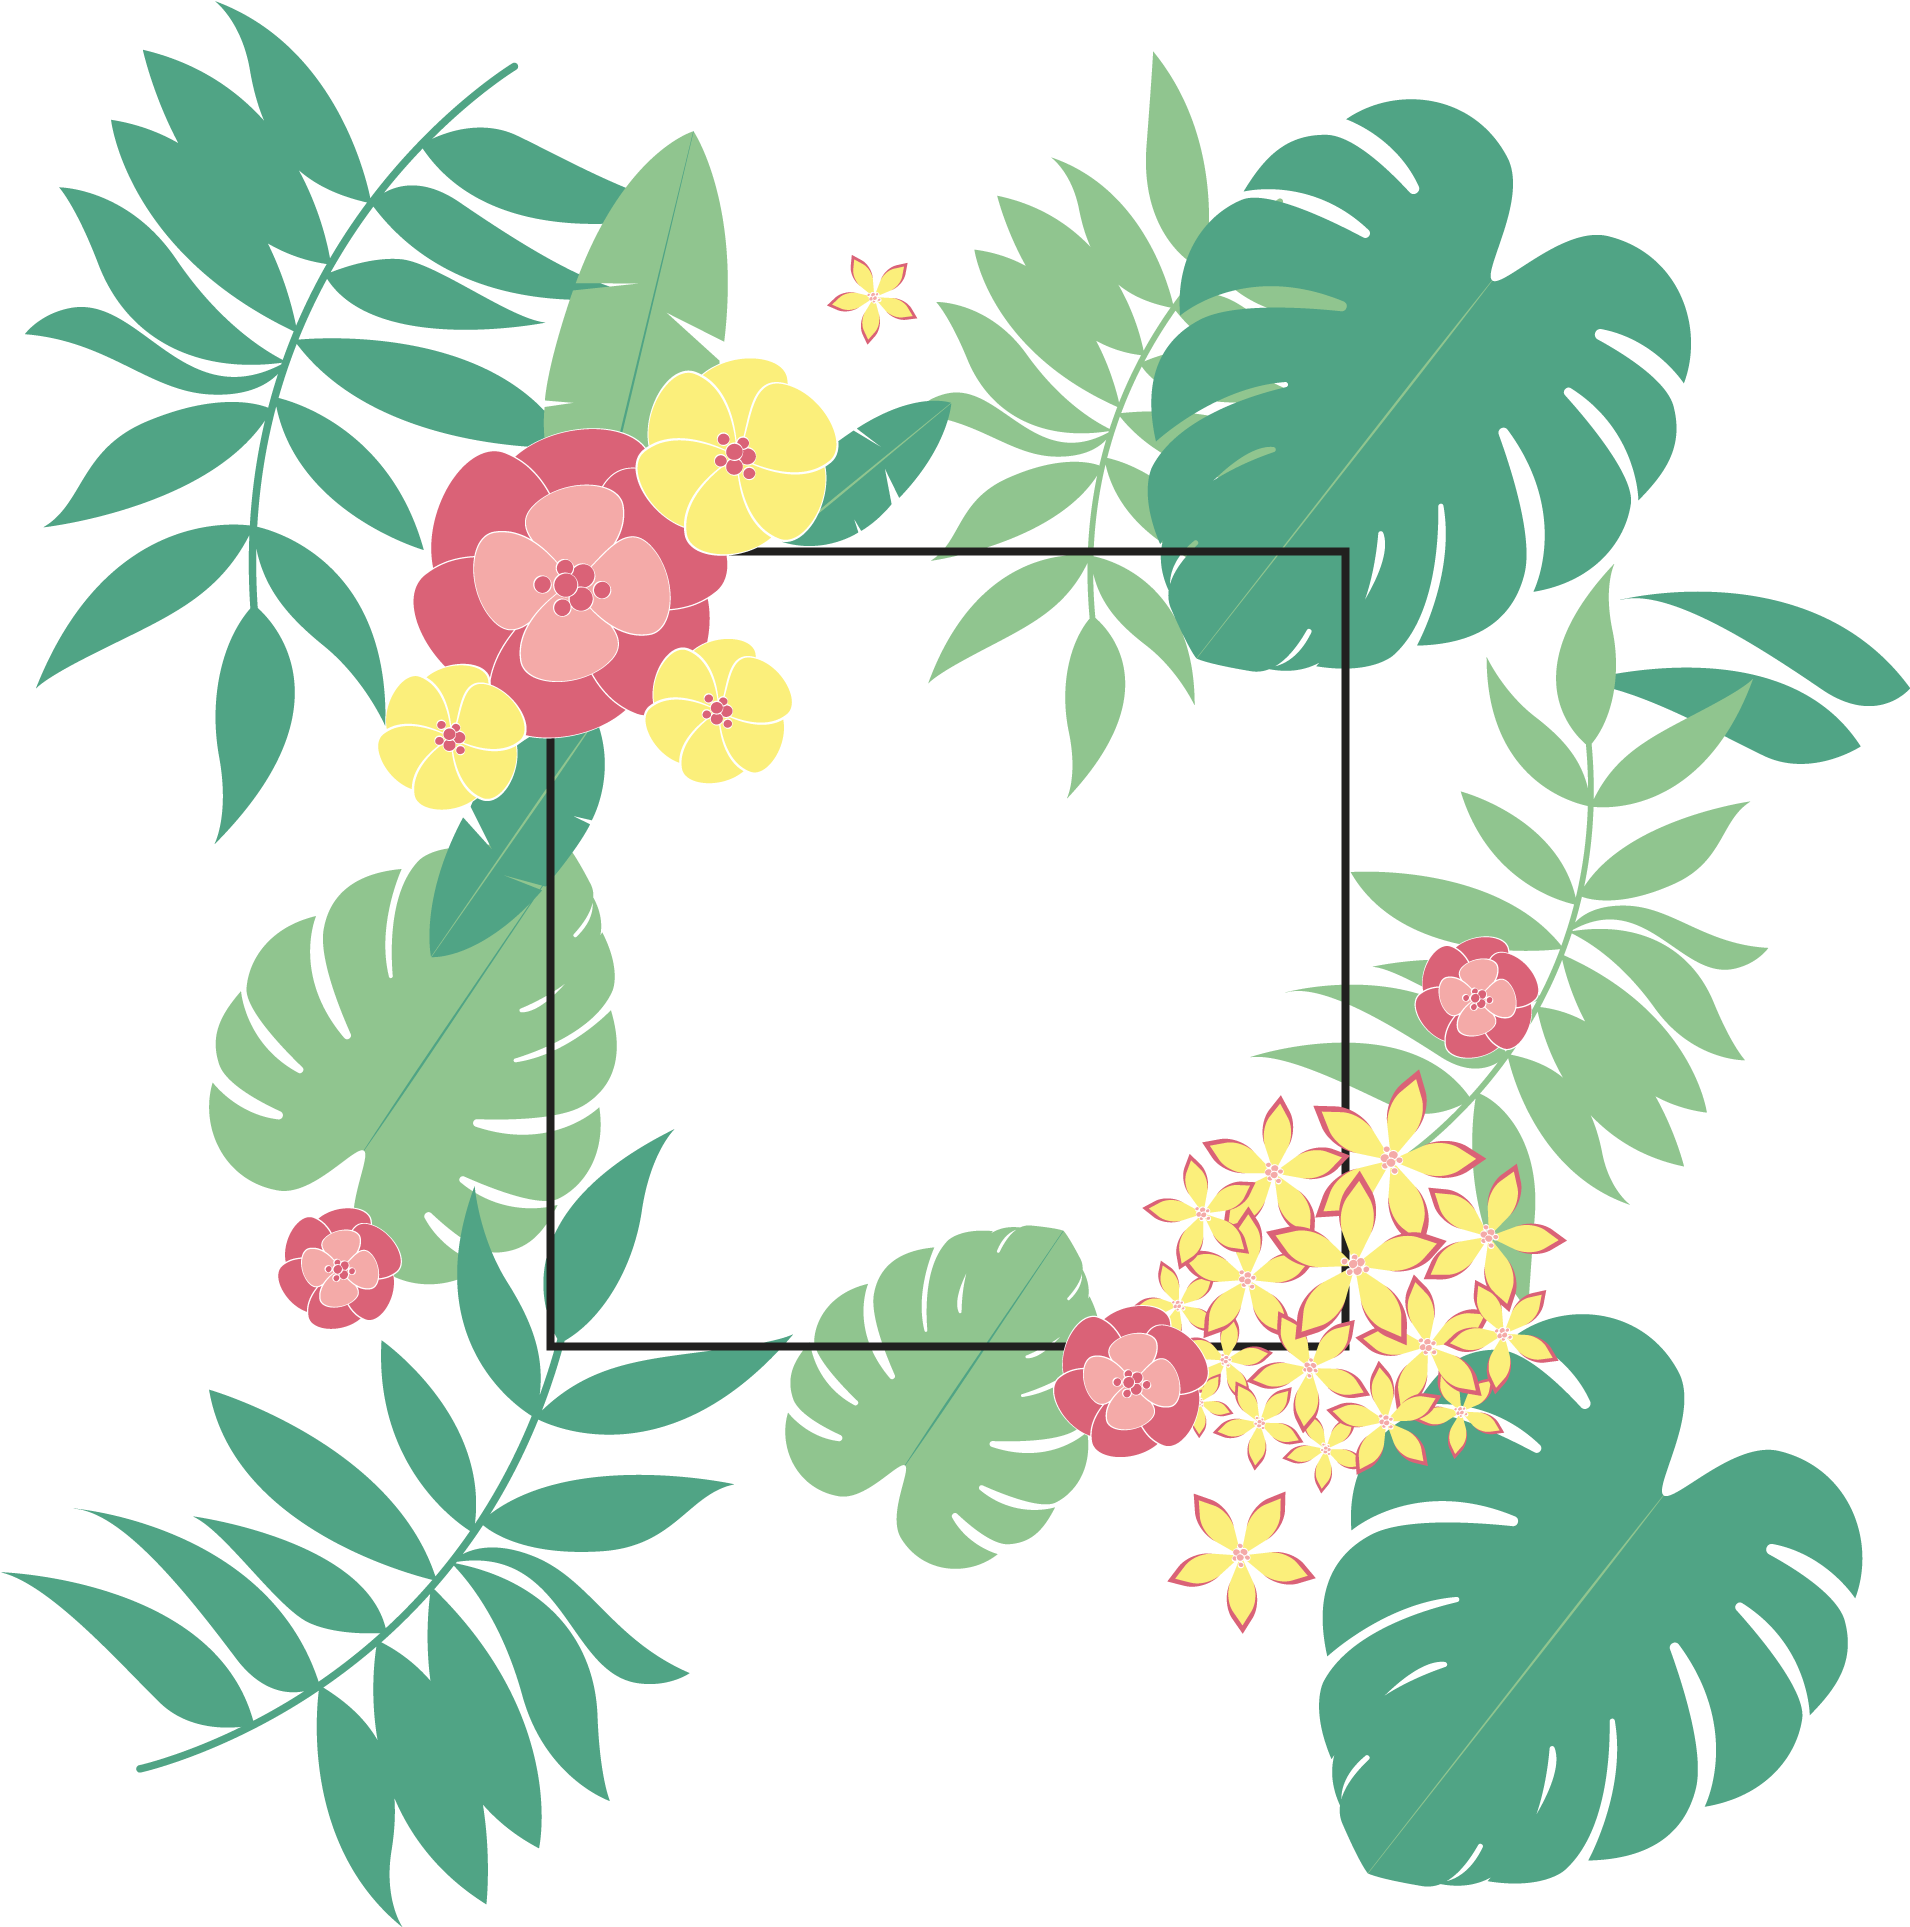 A Group Of Flowers And Leaves